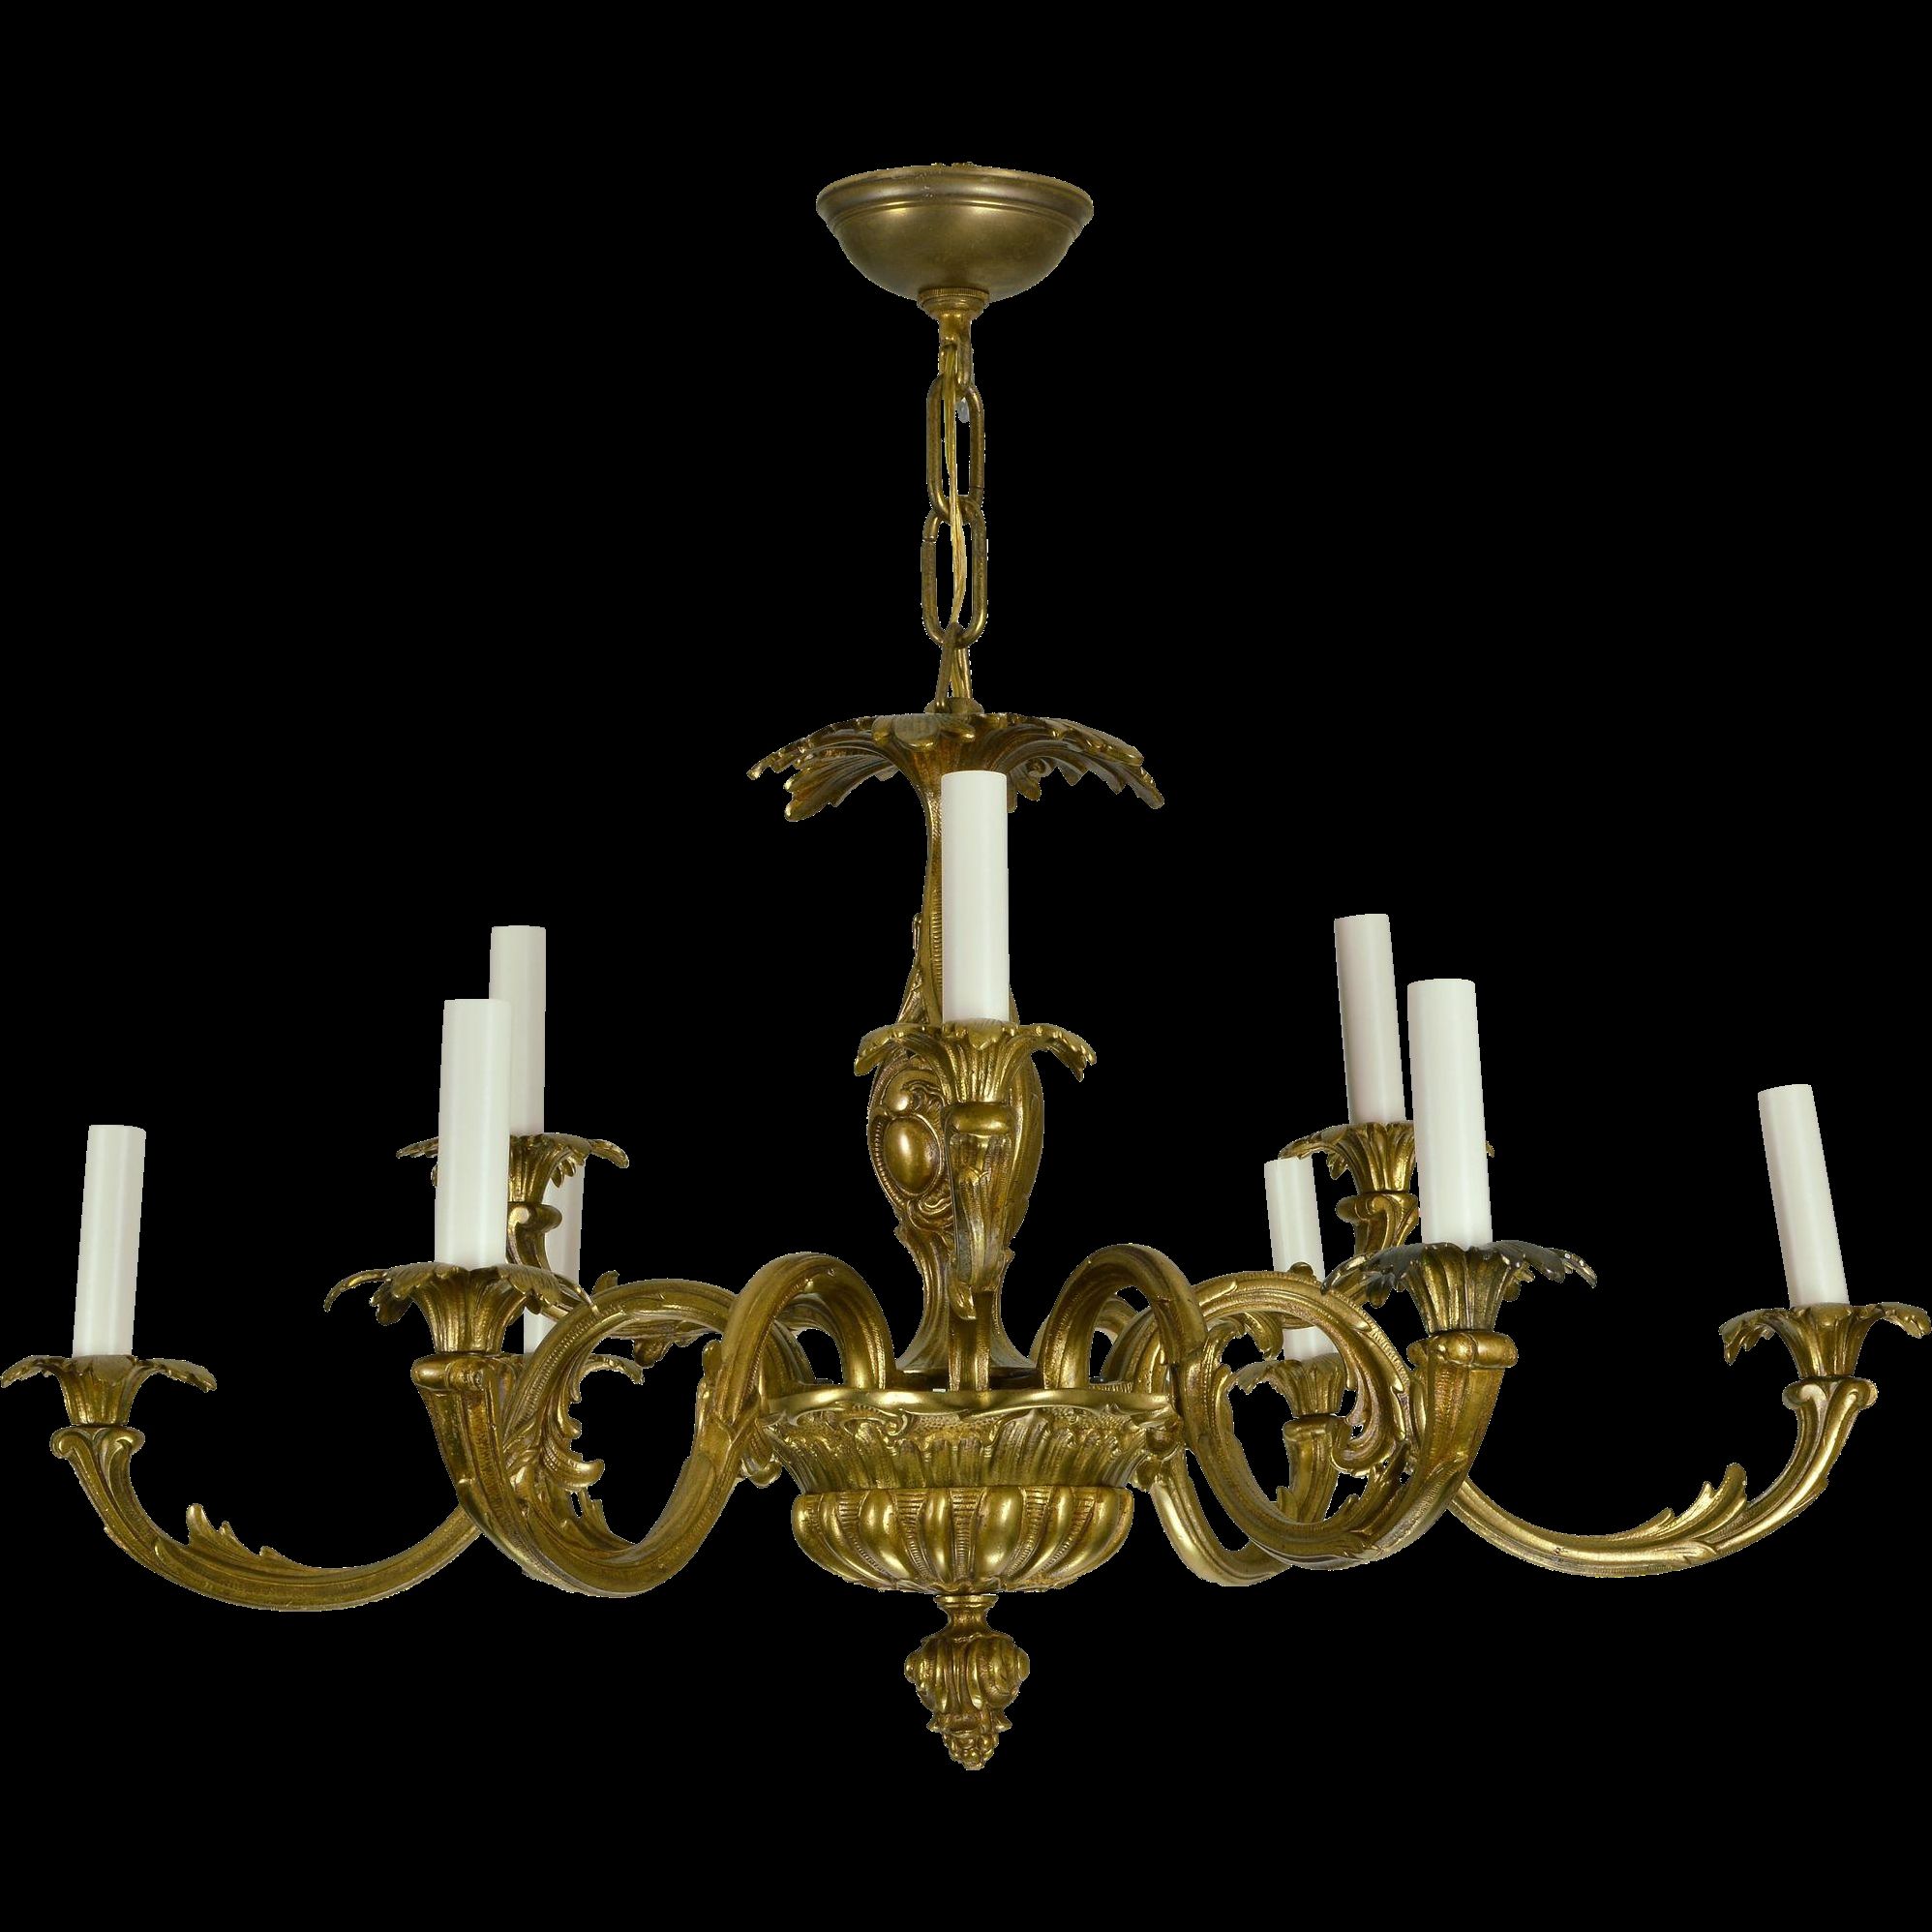 Vintage Brass French Baroque Chandelier From Tolw On Ru Lane Inside Baroque Chandelier (View 4 of 12)